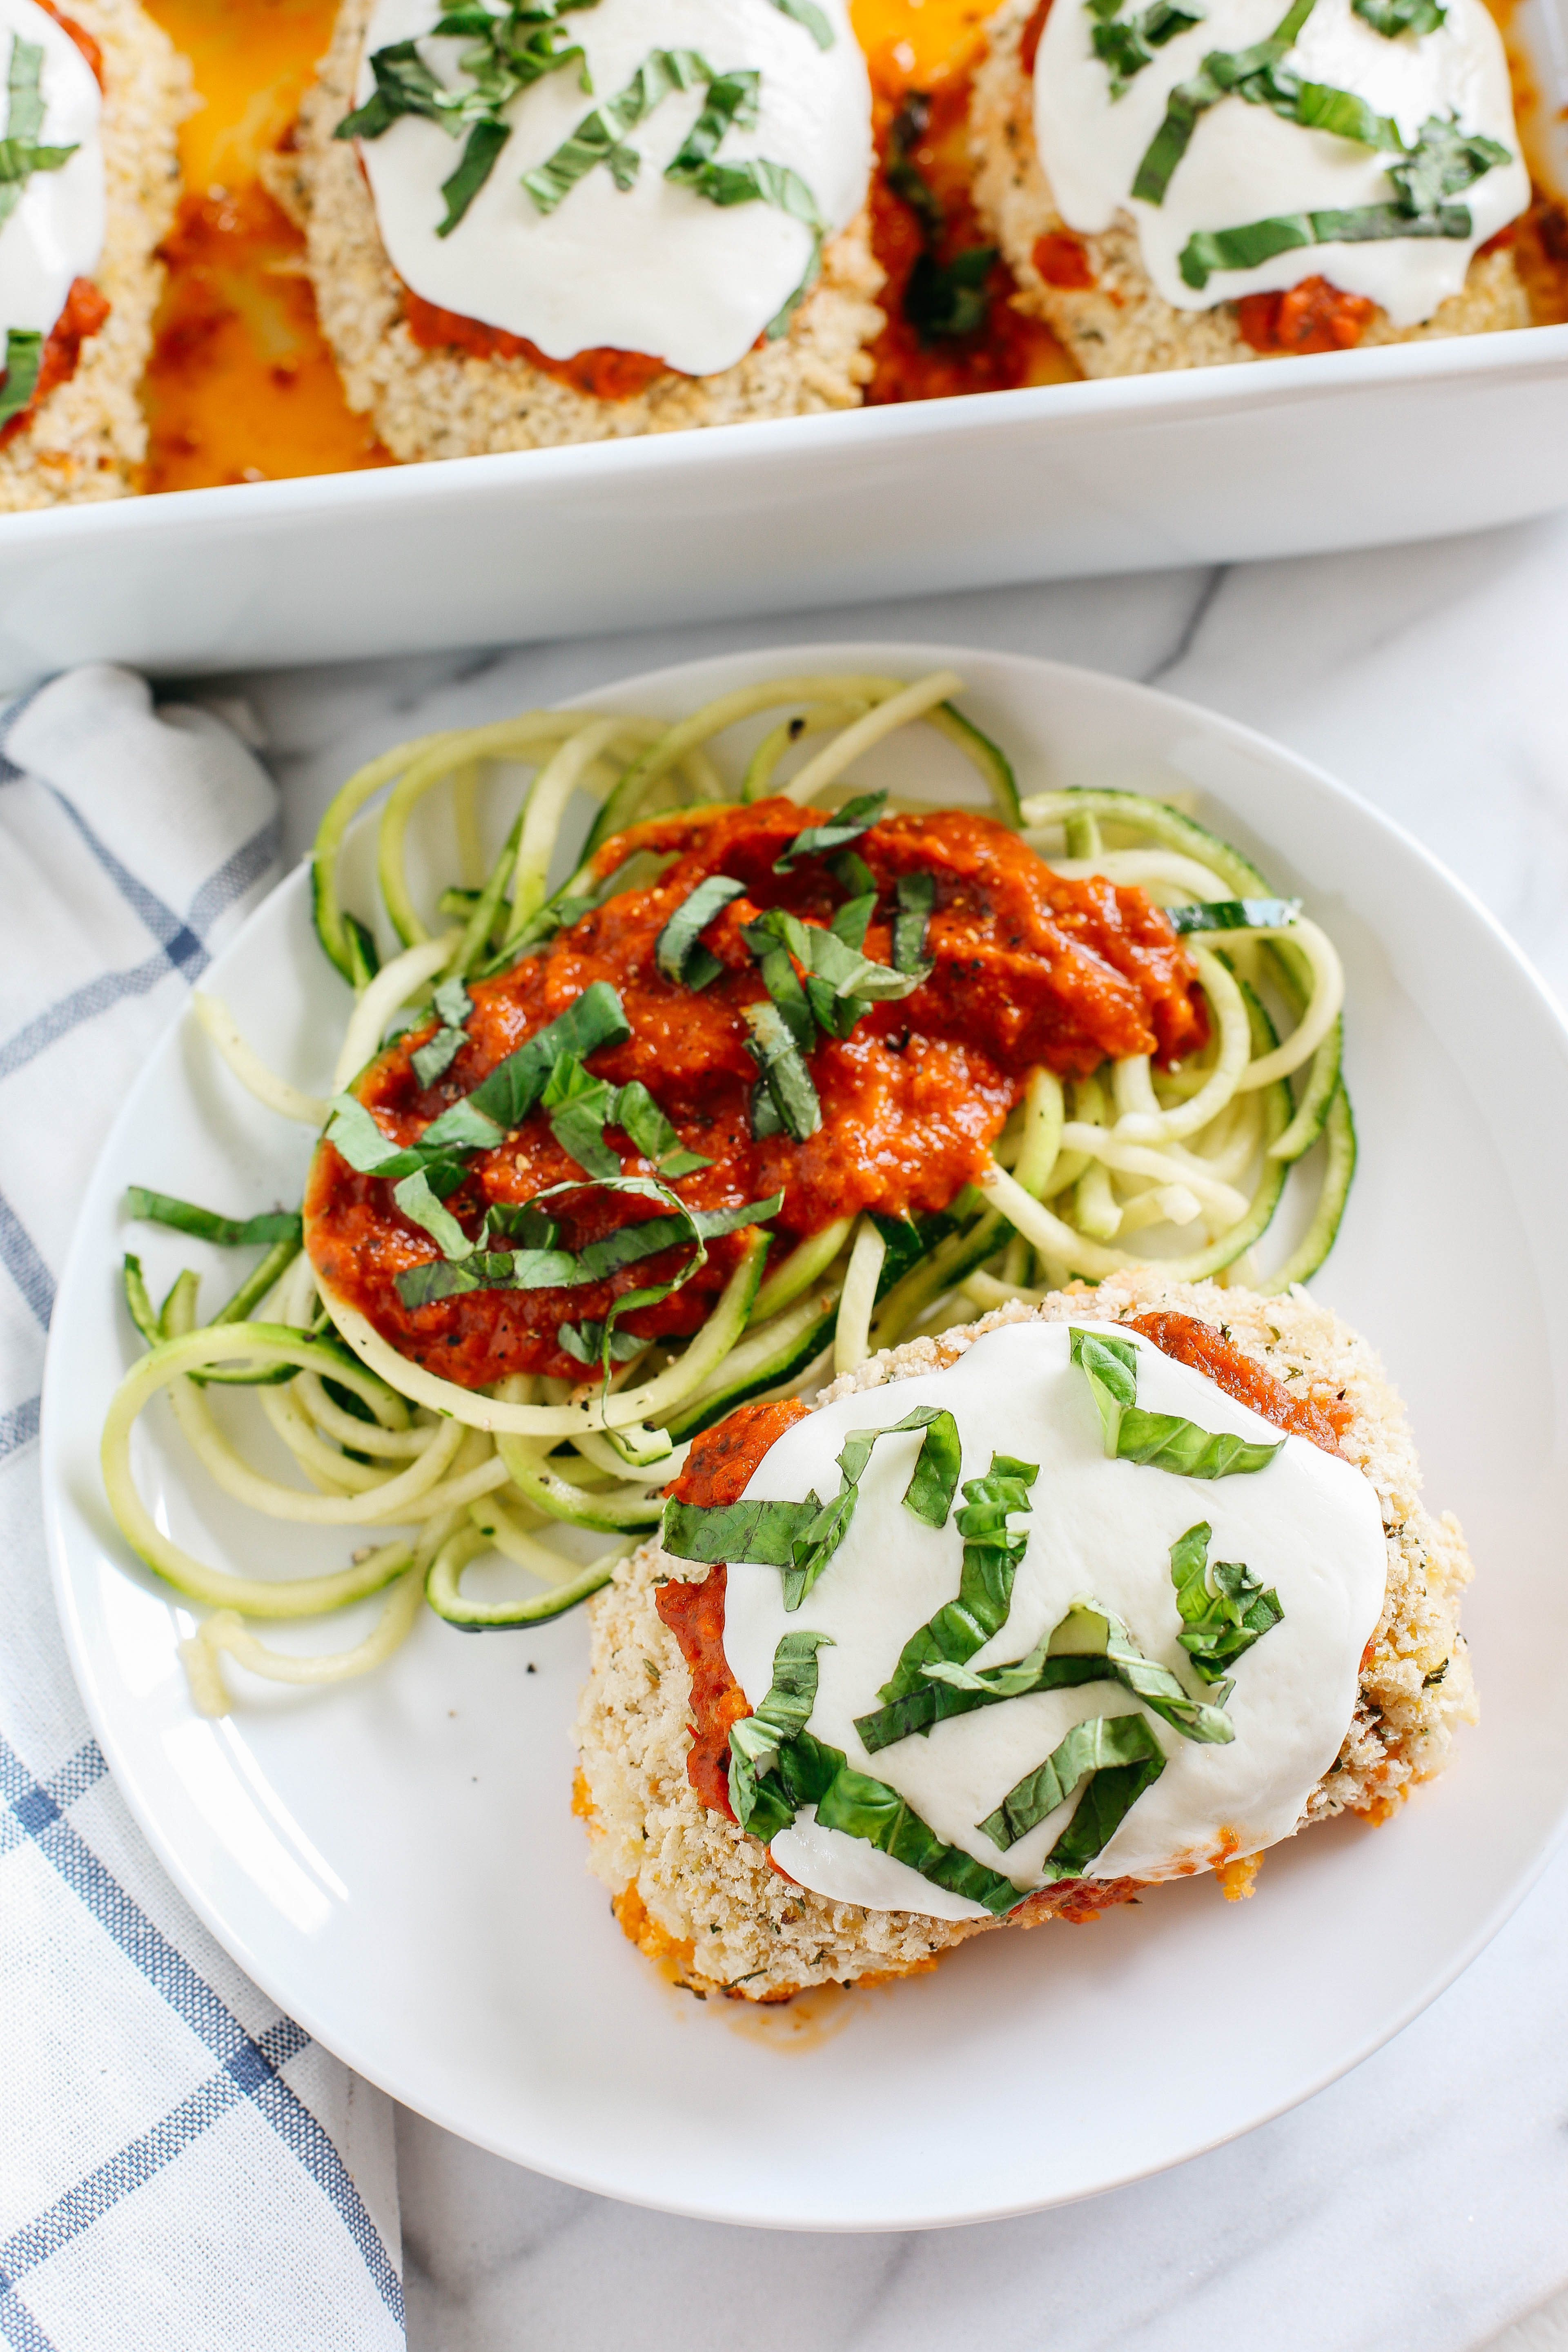 This recipe for Sun Dried Tomato Pesto Chicken Rolls makes the perfect weeknight comfort meal that is cheesy and delicious with even tastier leftovers!  Serve with zucchini noodles for a complete meal!